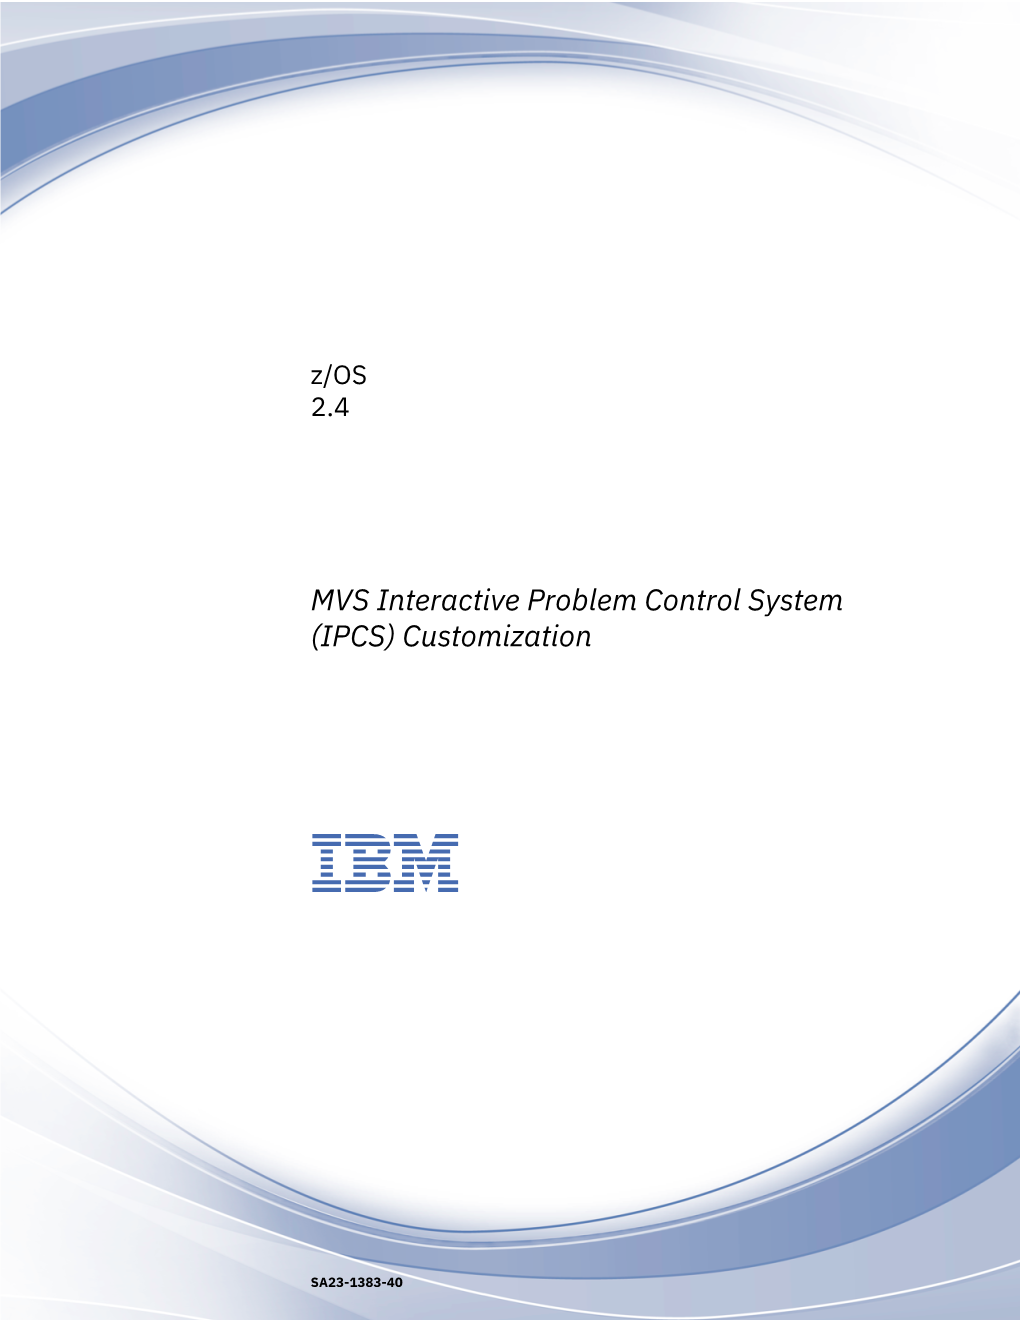 Z/OS: Z/OS MVS IPCS Customization How to Send Your Comments to IBM